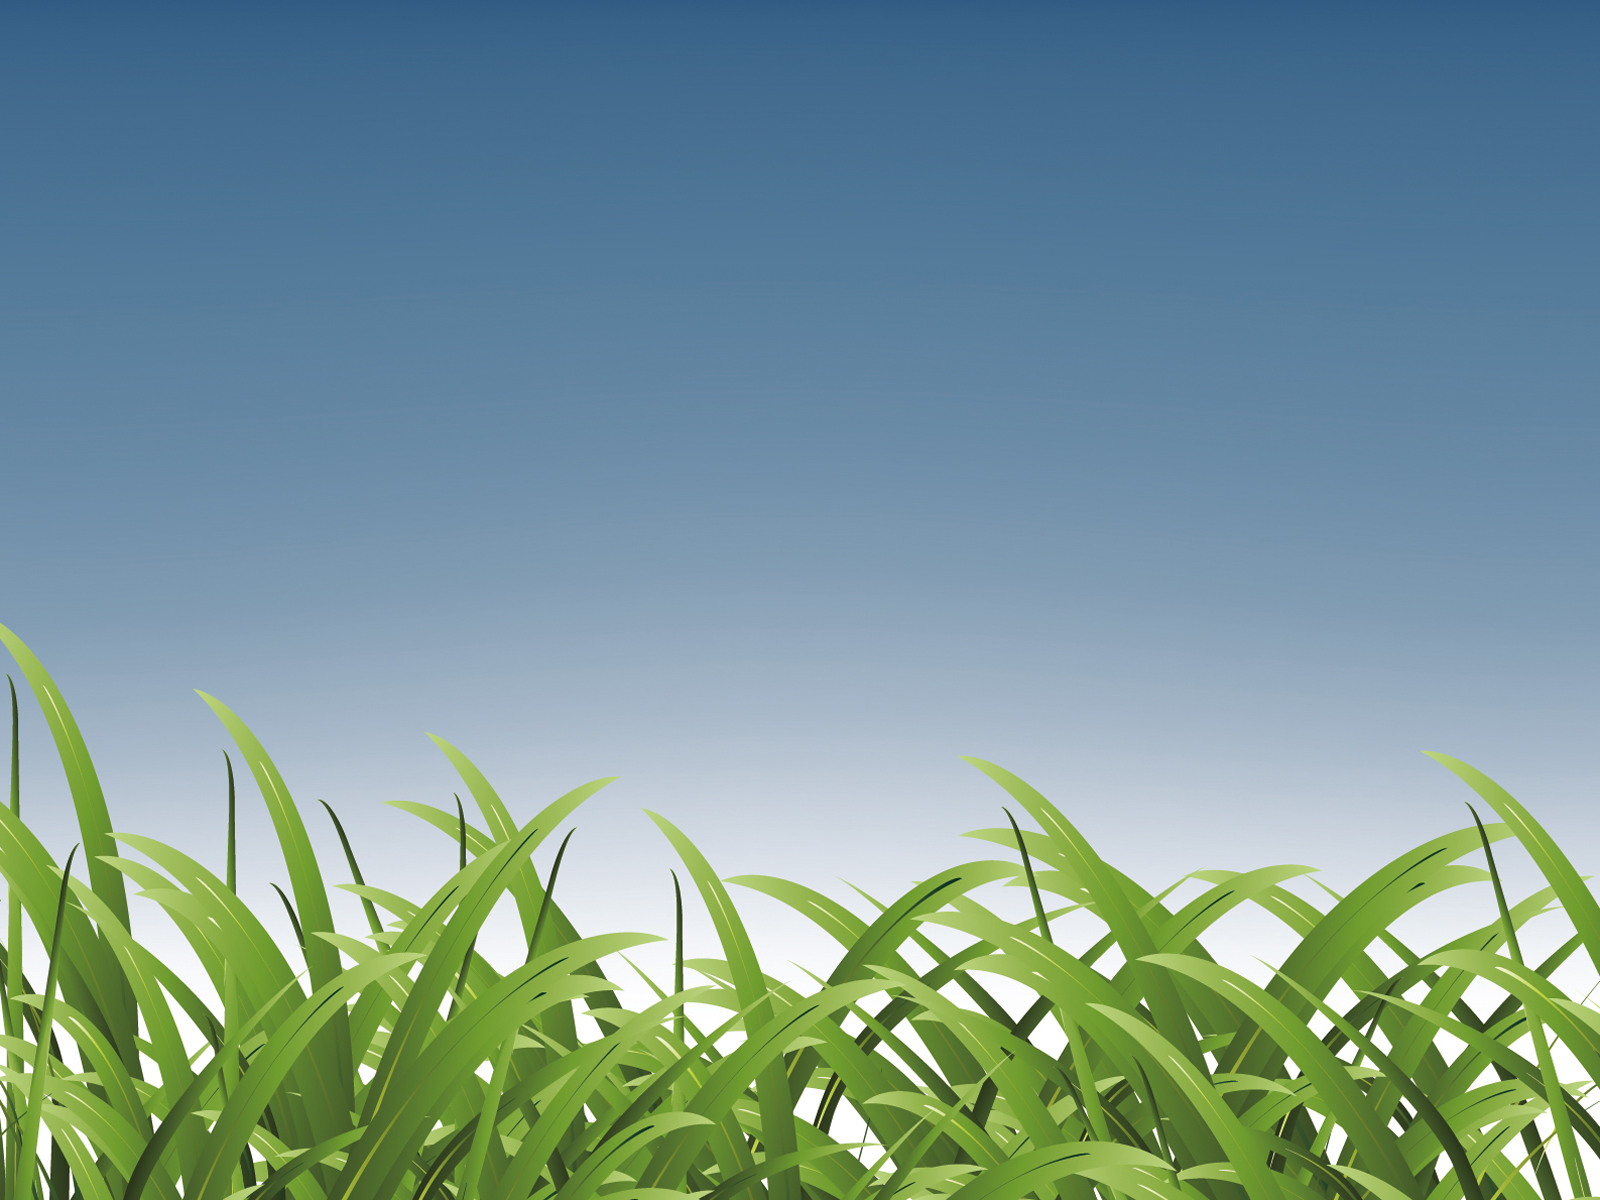 Grass for Sports Backgrounds | Sports Templates | Free PPT ...